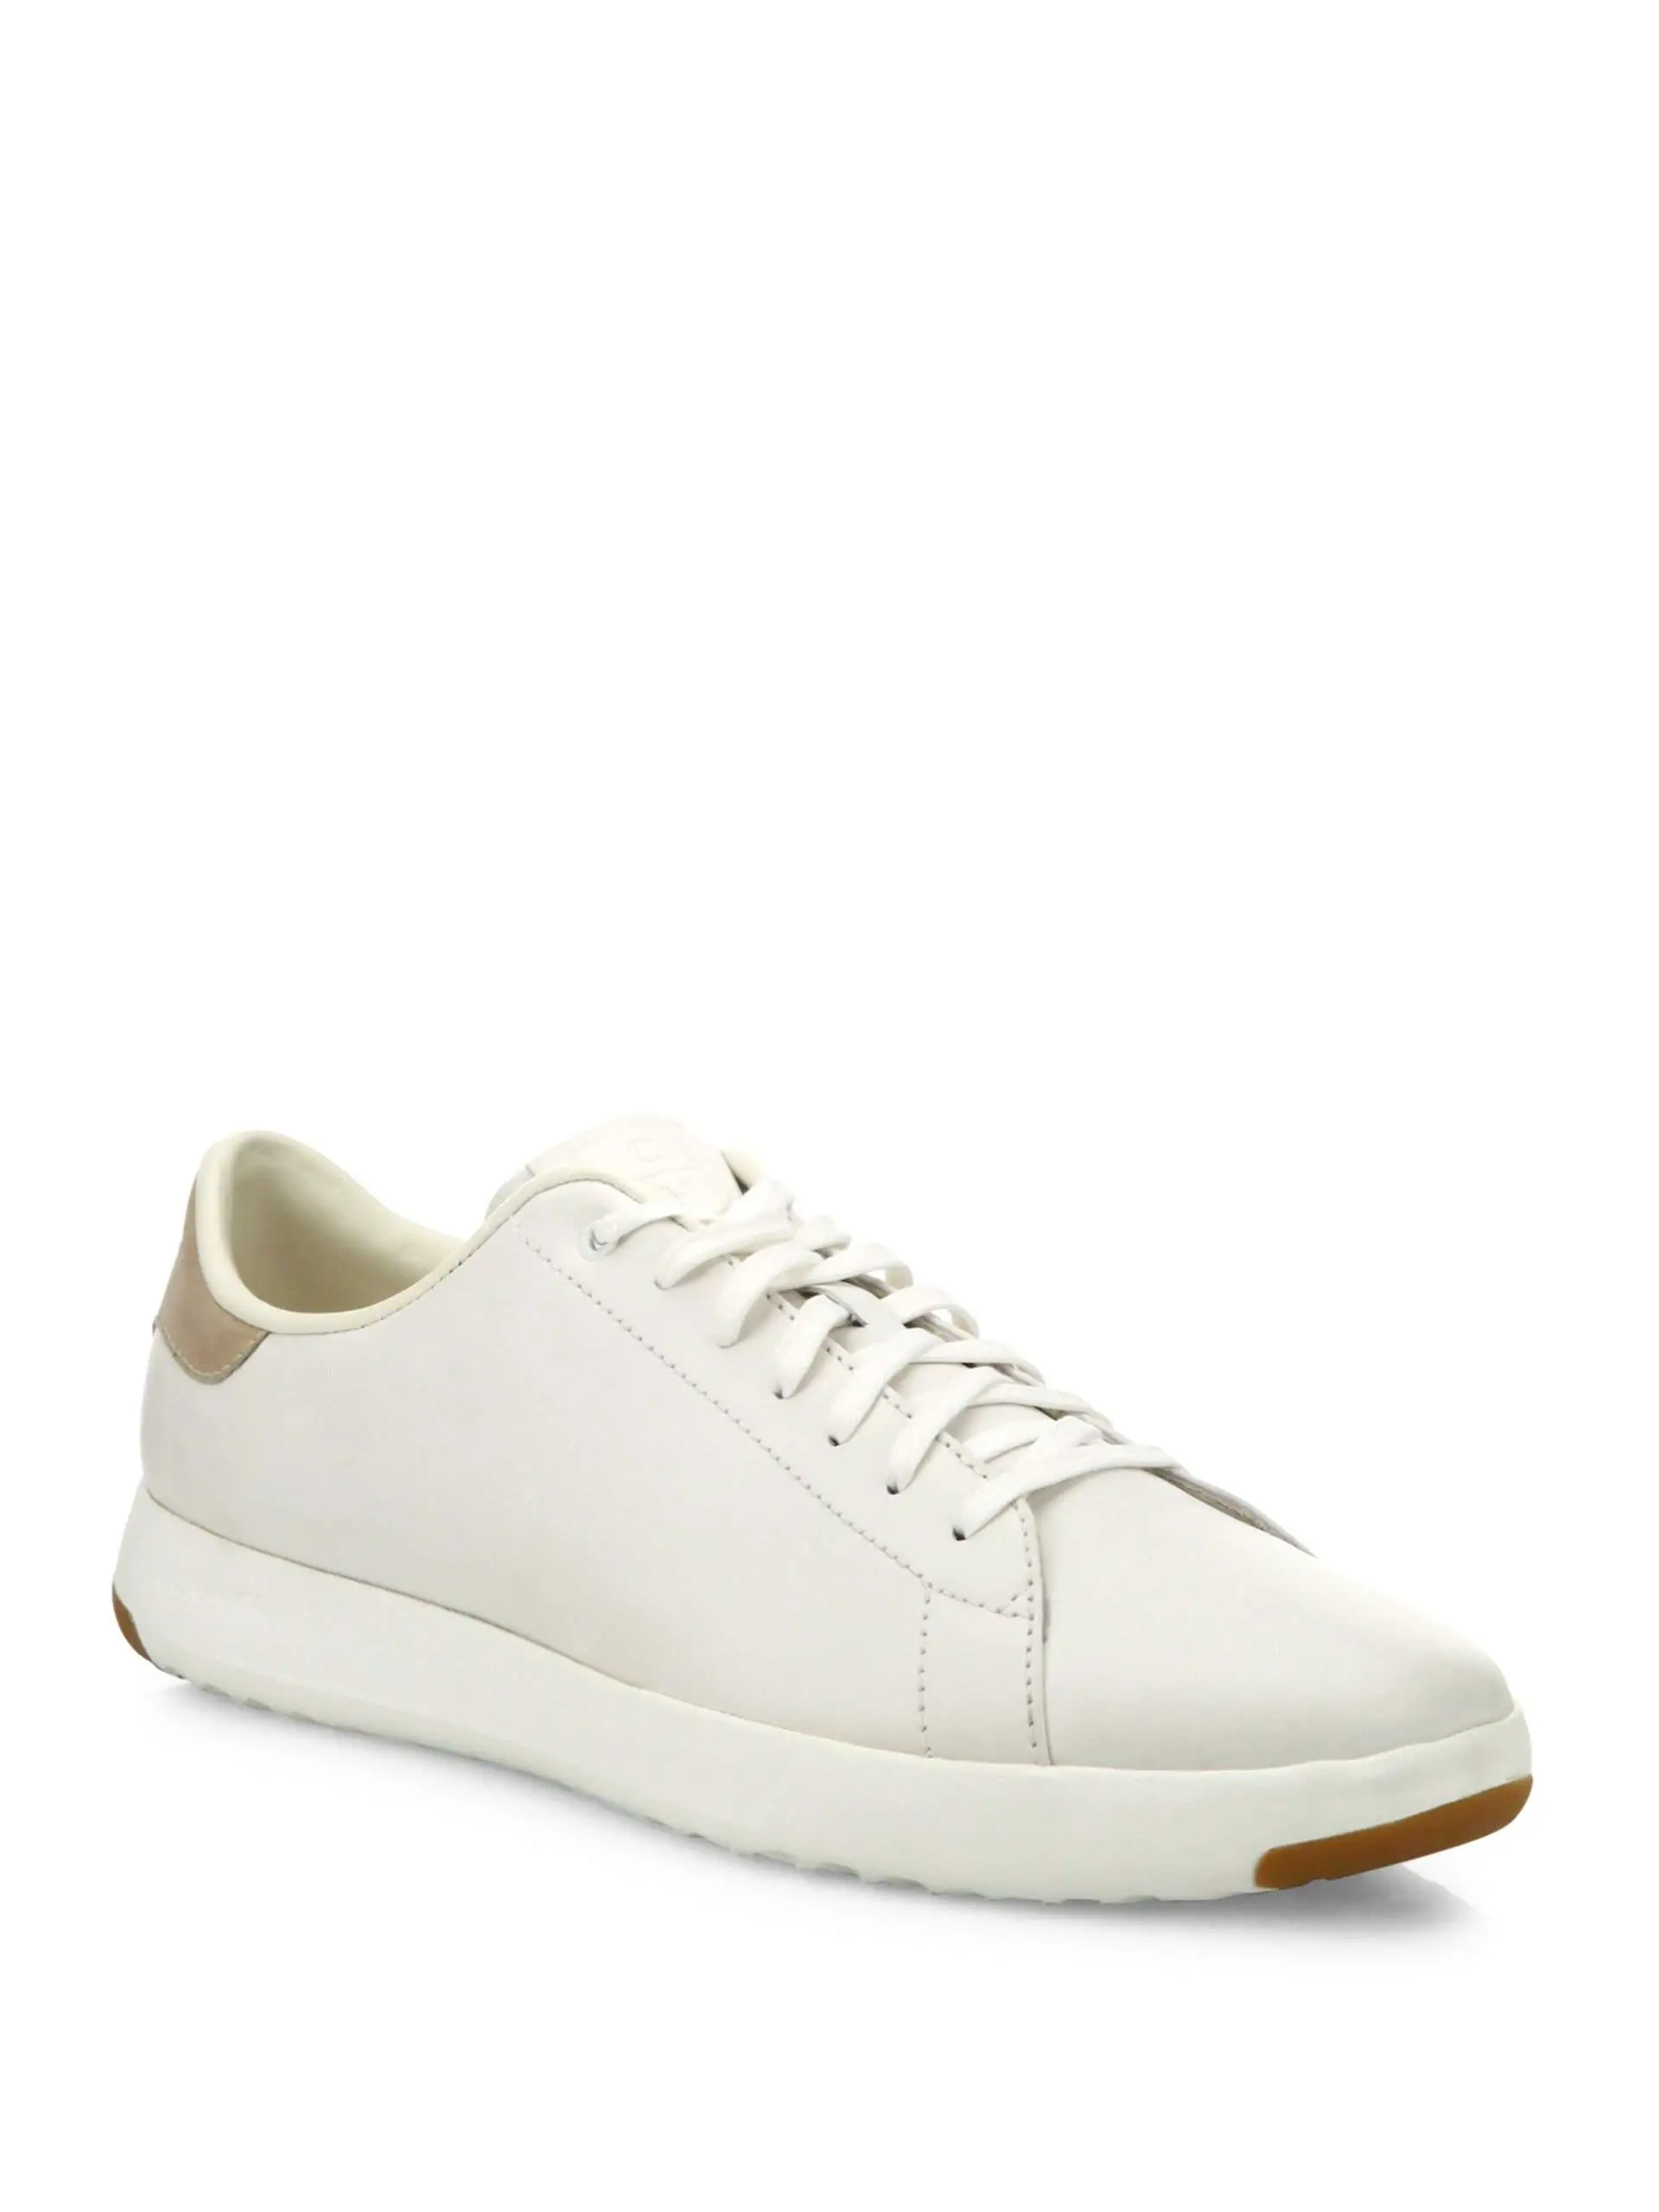 Cole haan Grandpro Tennis Leather Sneakers in White for ...